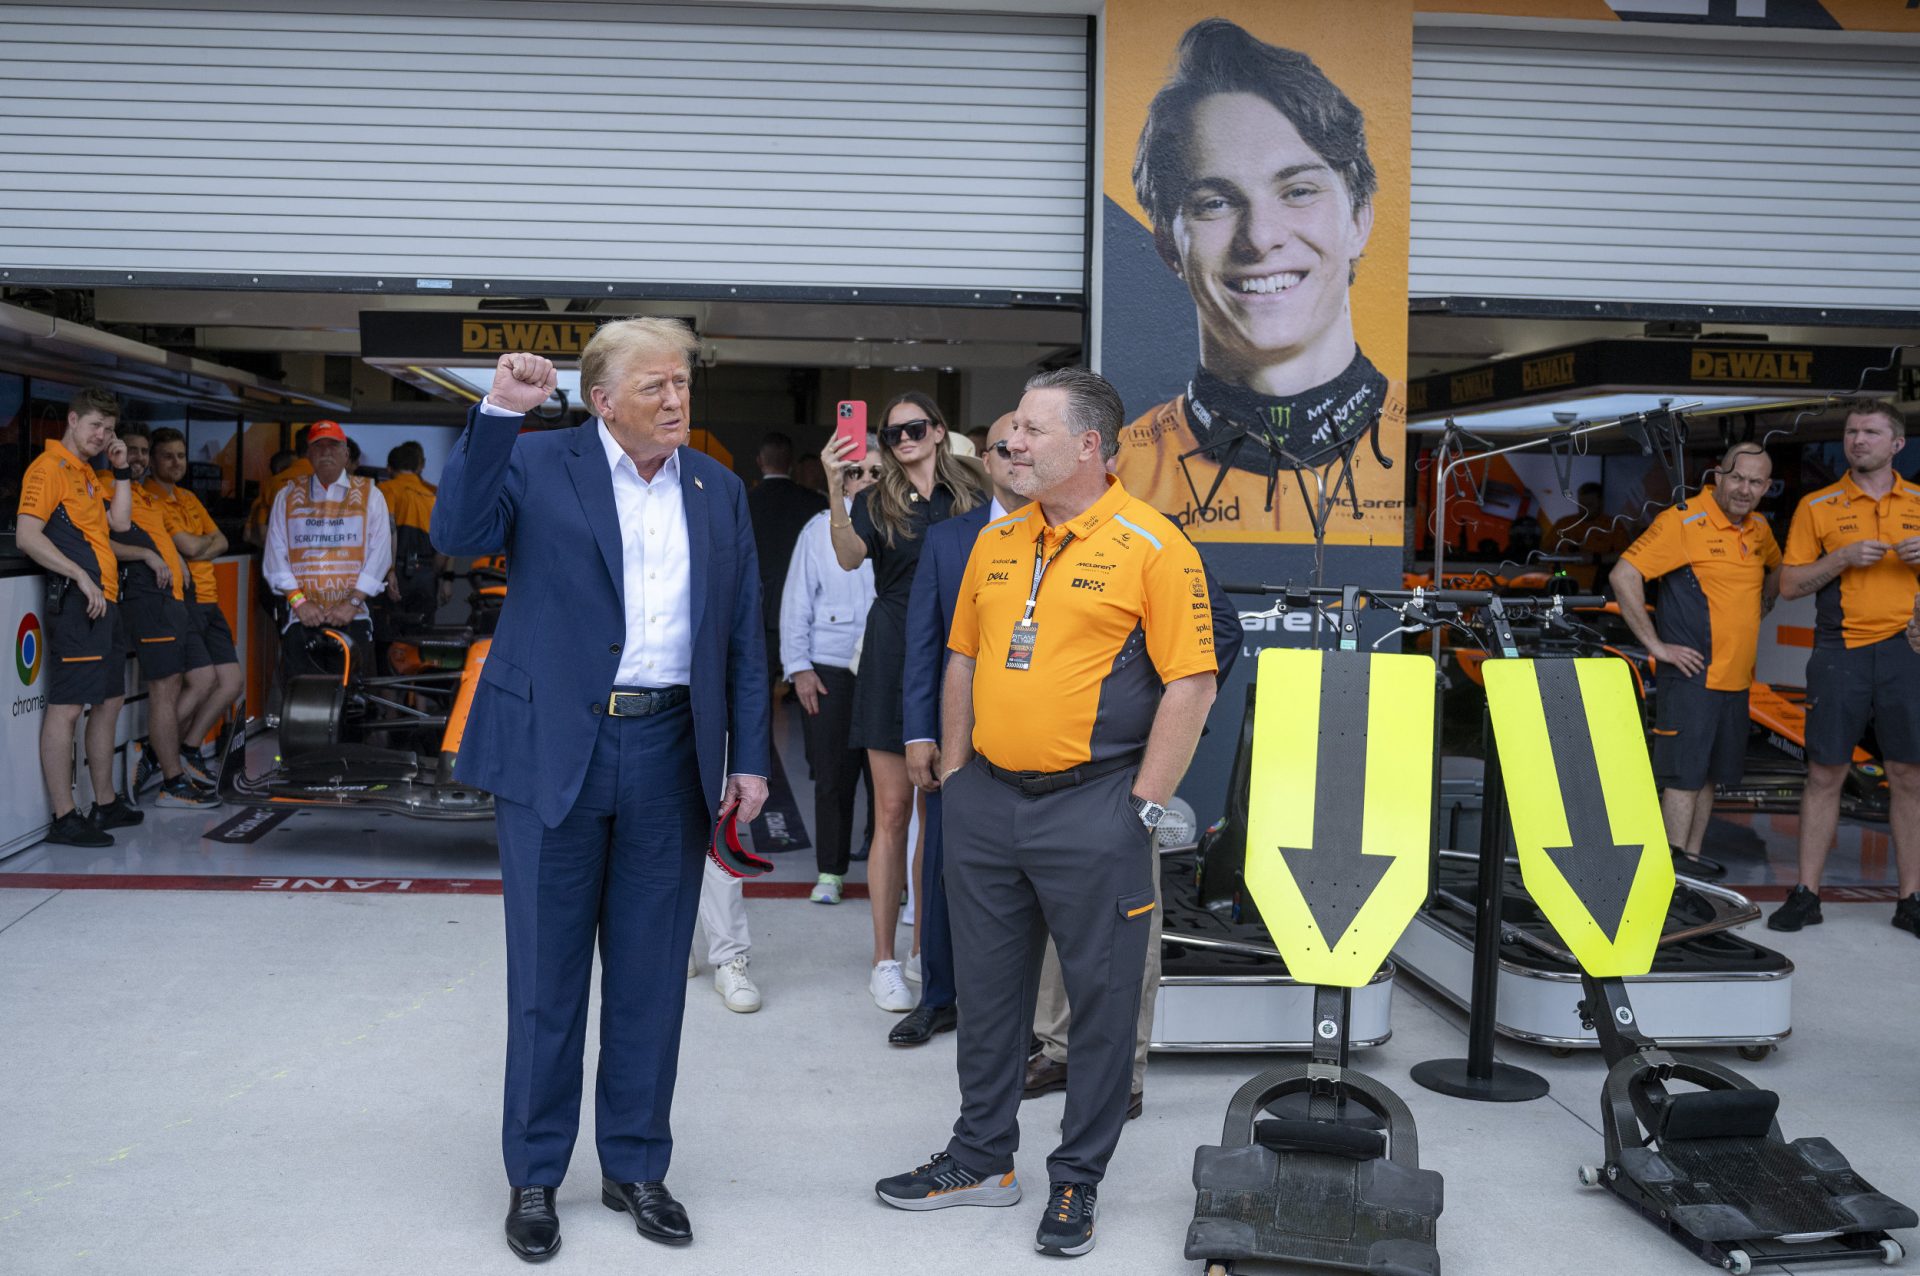 videos:-trump-cheered-as-he-arrives-at-f1-in-miami-amid-new-york-trial